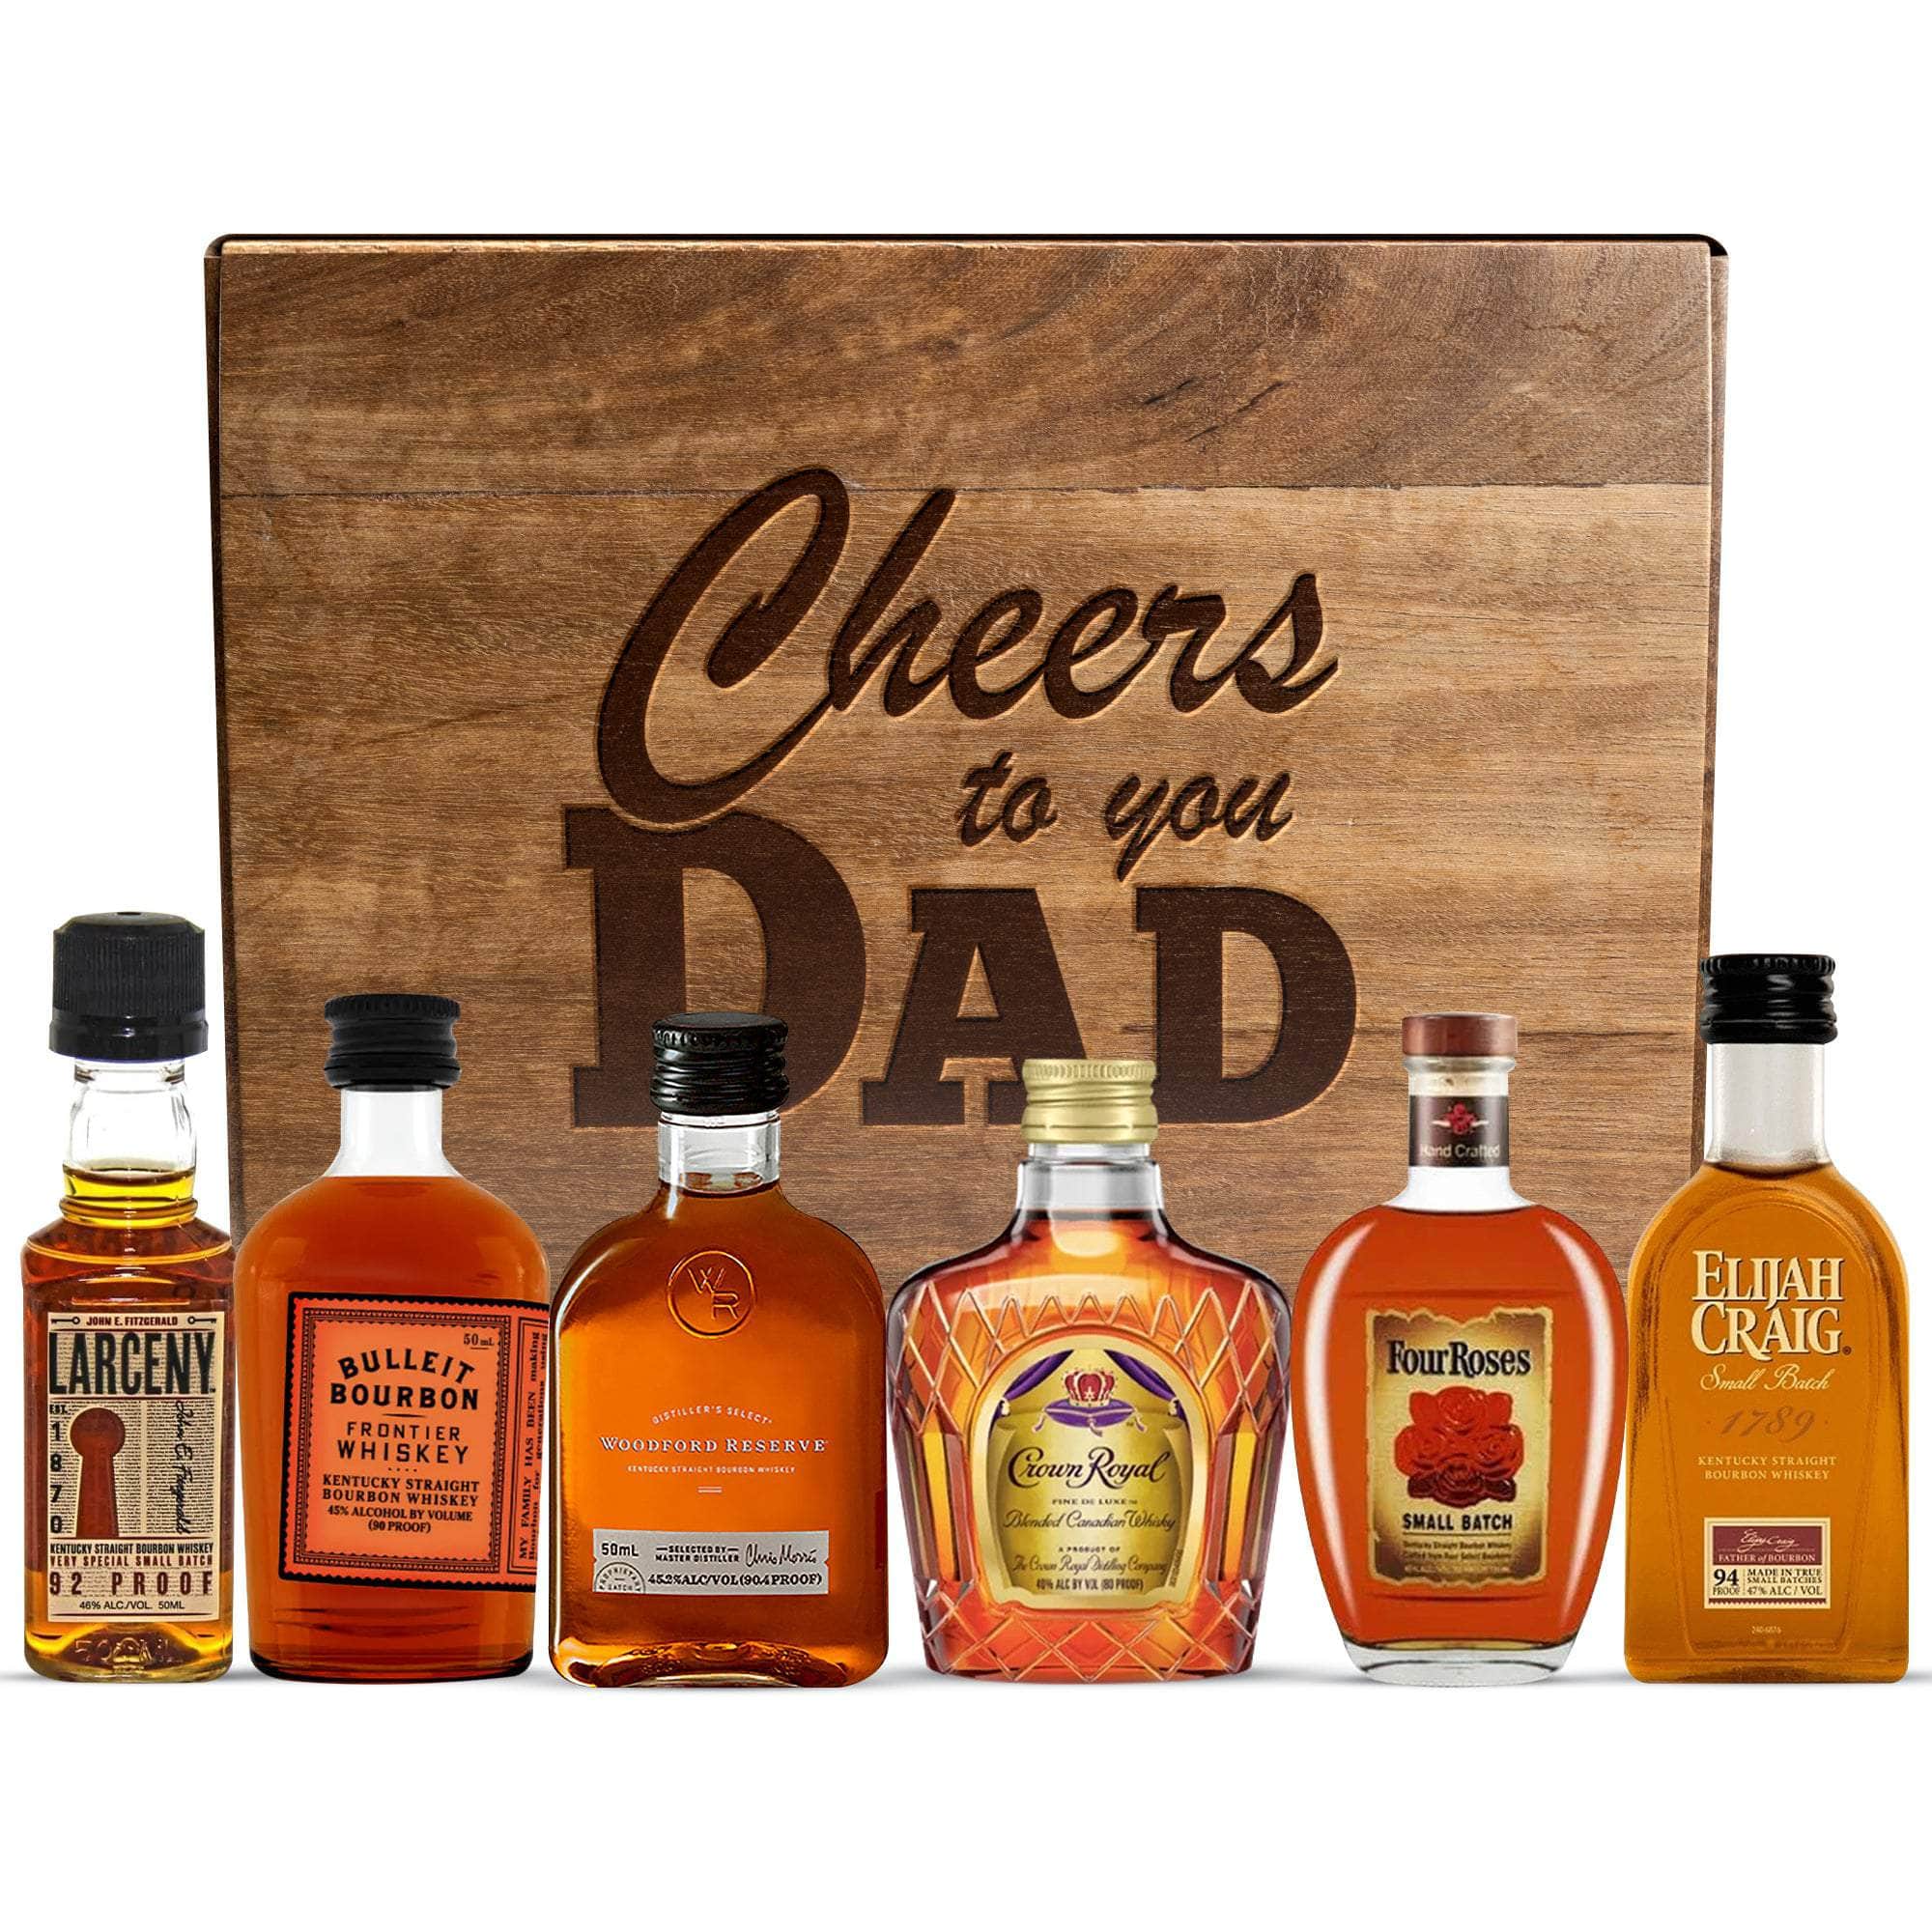 Father's Day Beer Gifts, Father's Day Beer Baskets, Fathers Day Beer -  www.GiveThemBeer.com